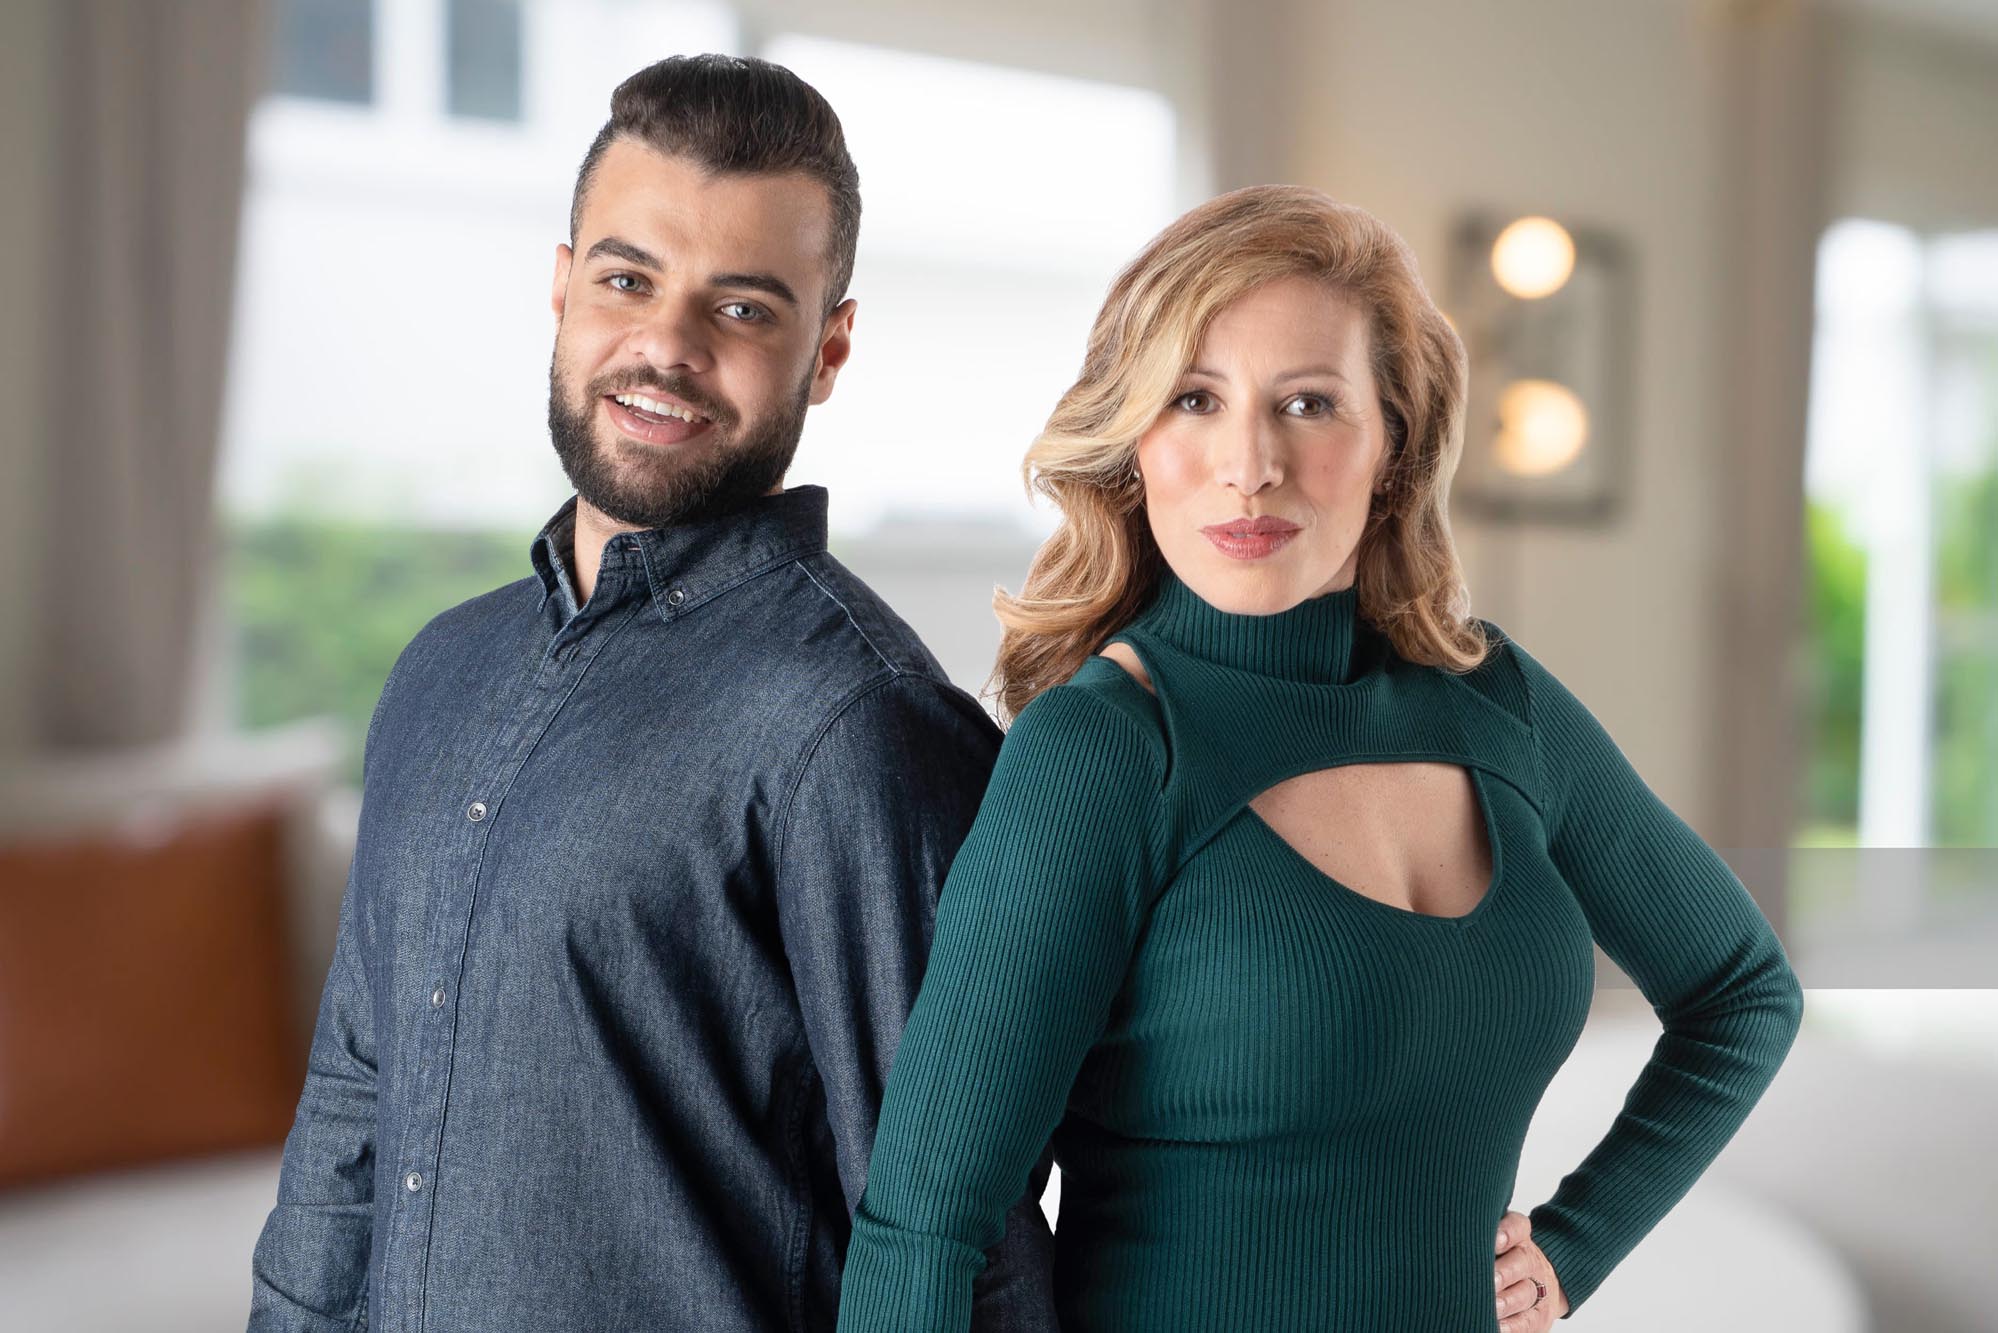 '90 Day Fiancé' stars Mohamed and Yve, pose together for a promotional image. '90 Day Fiancé' fans recently called Mohamed out for his double standards